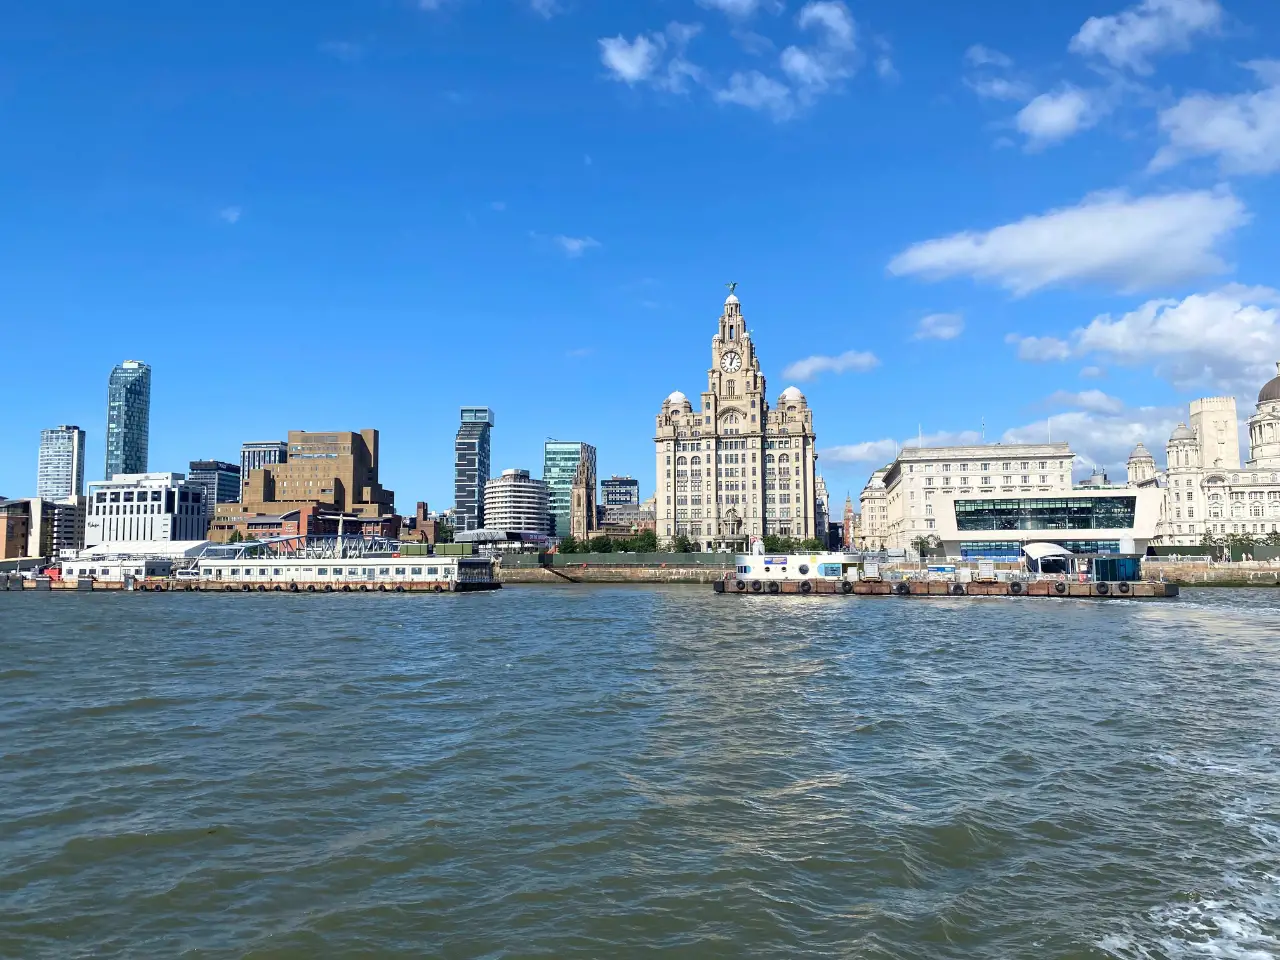 Royal Liver Building from the Mersey River